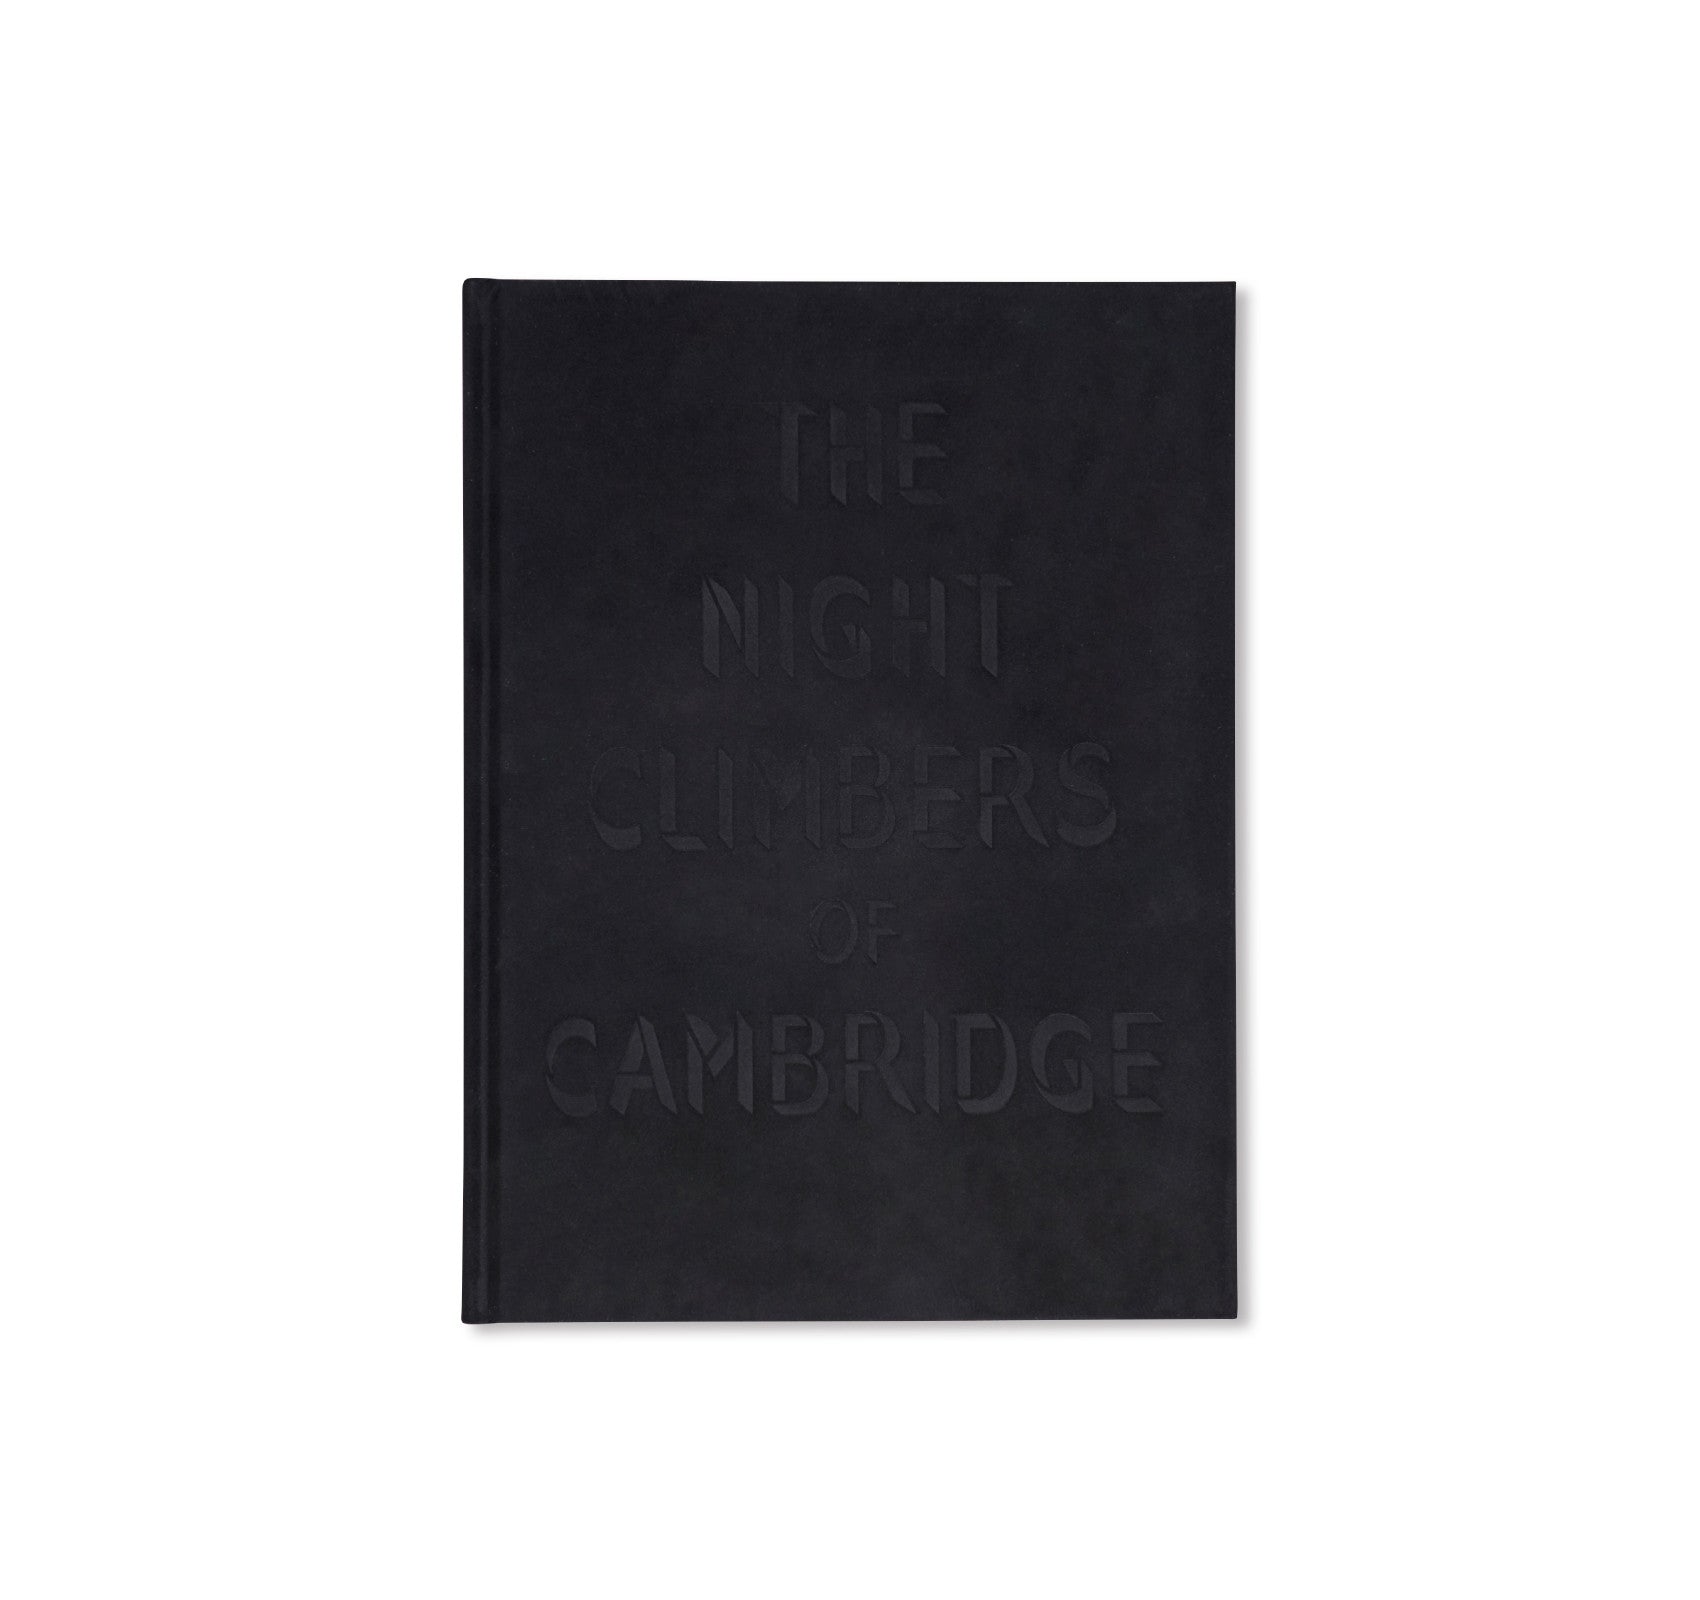 THE NIGHT CLIMBERS OF CAMBRIDGE by Thomas Mailaender